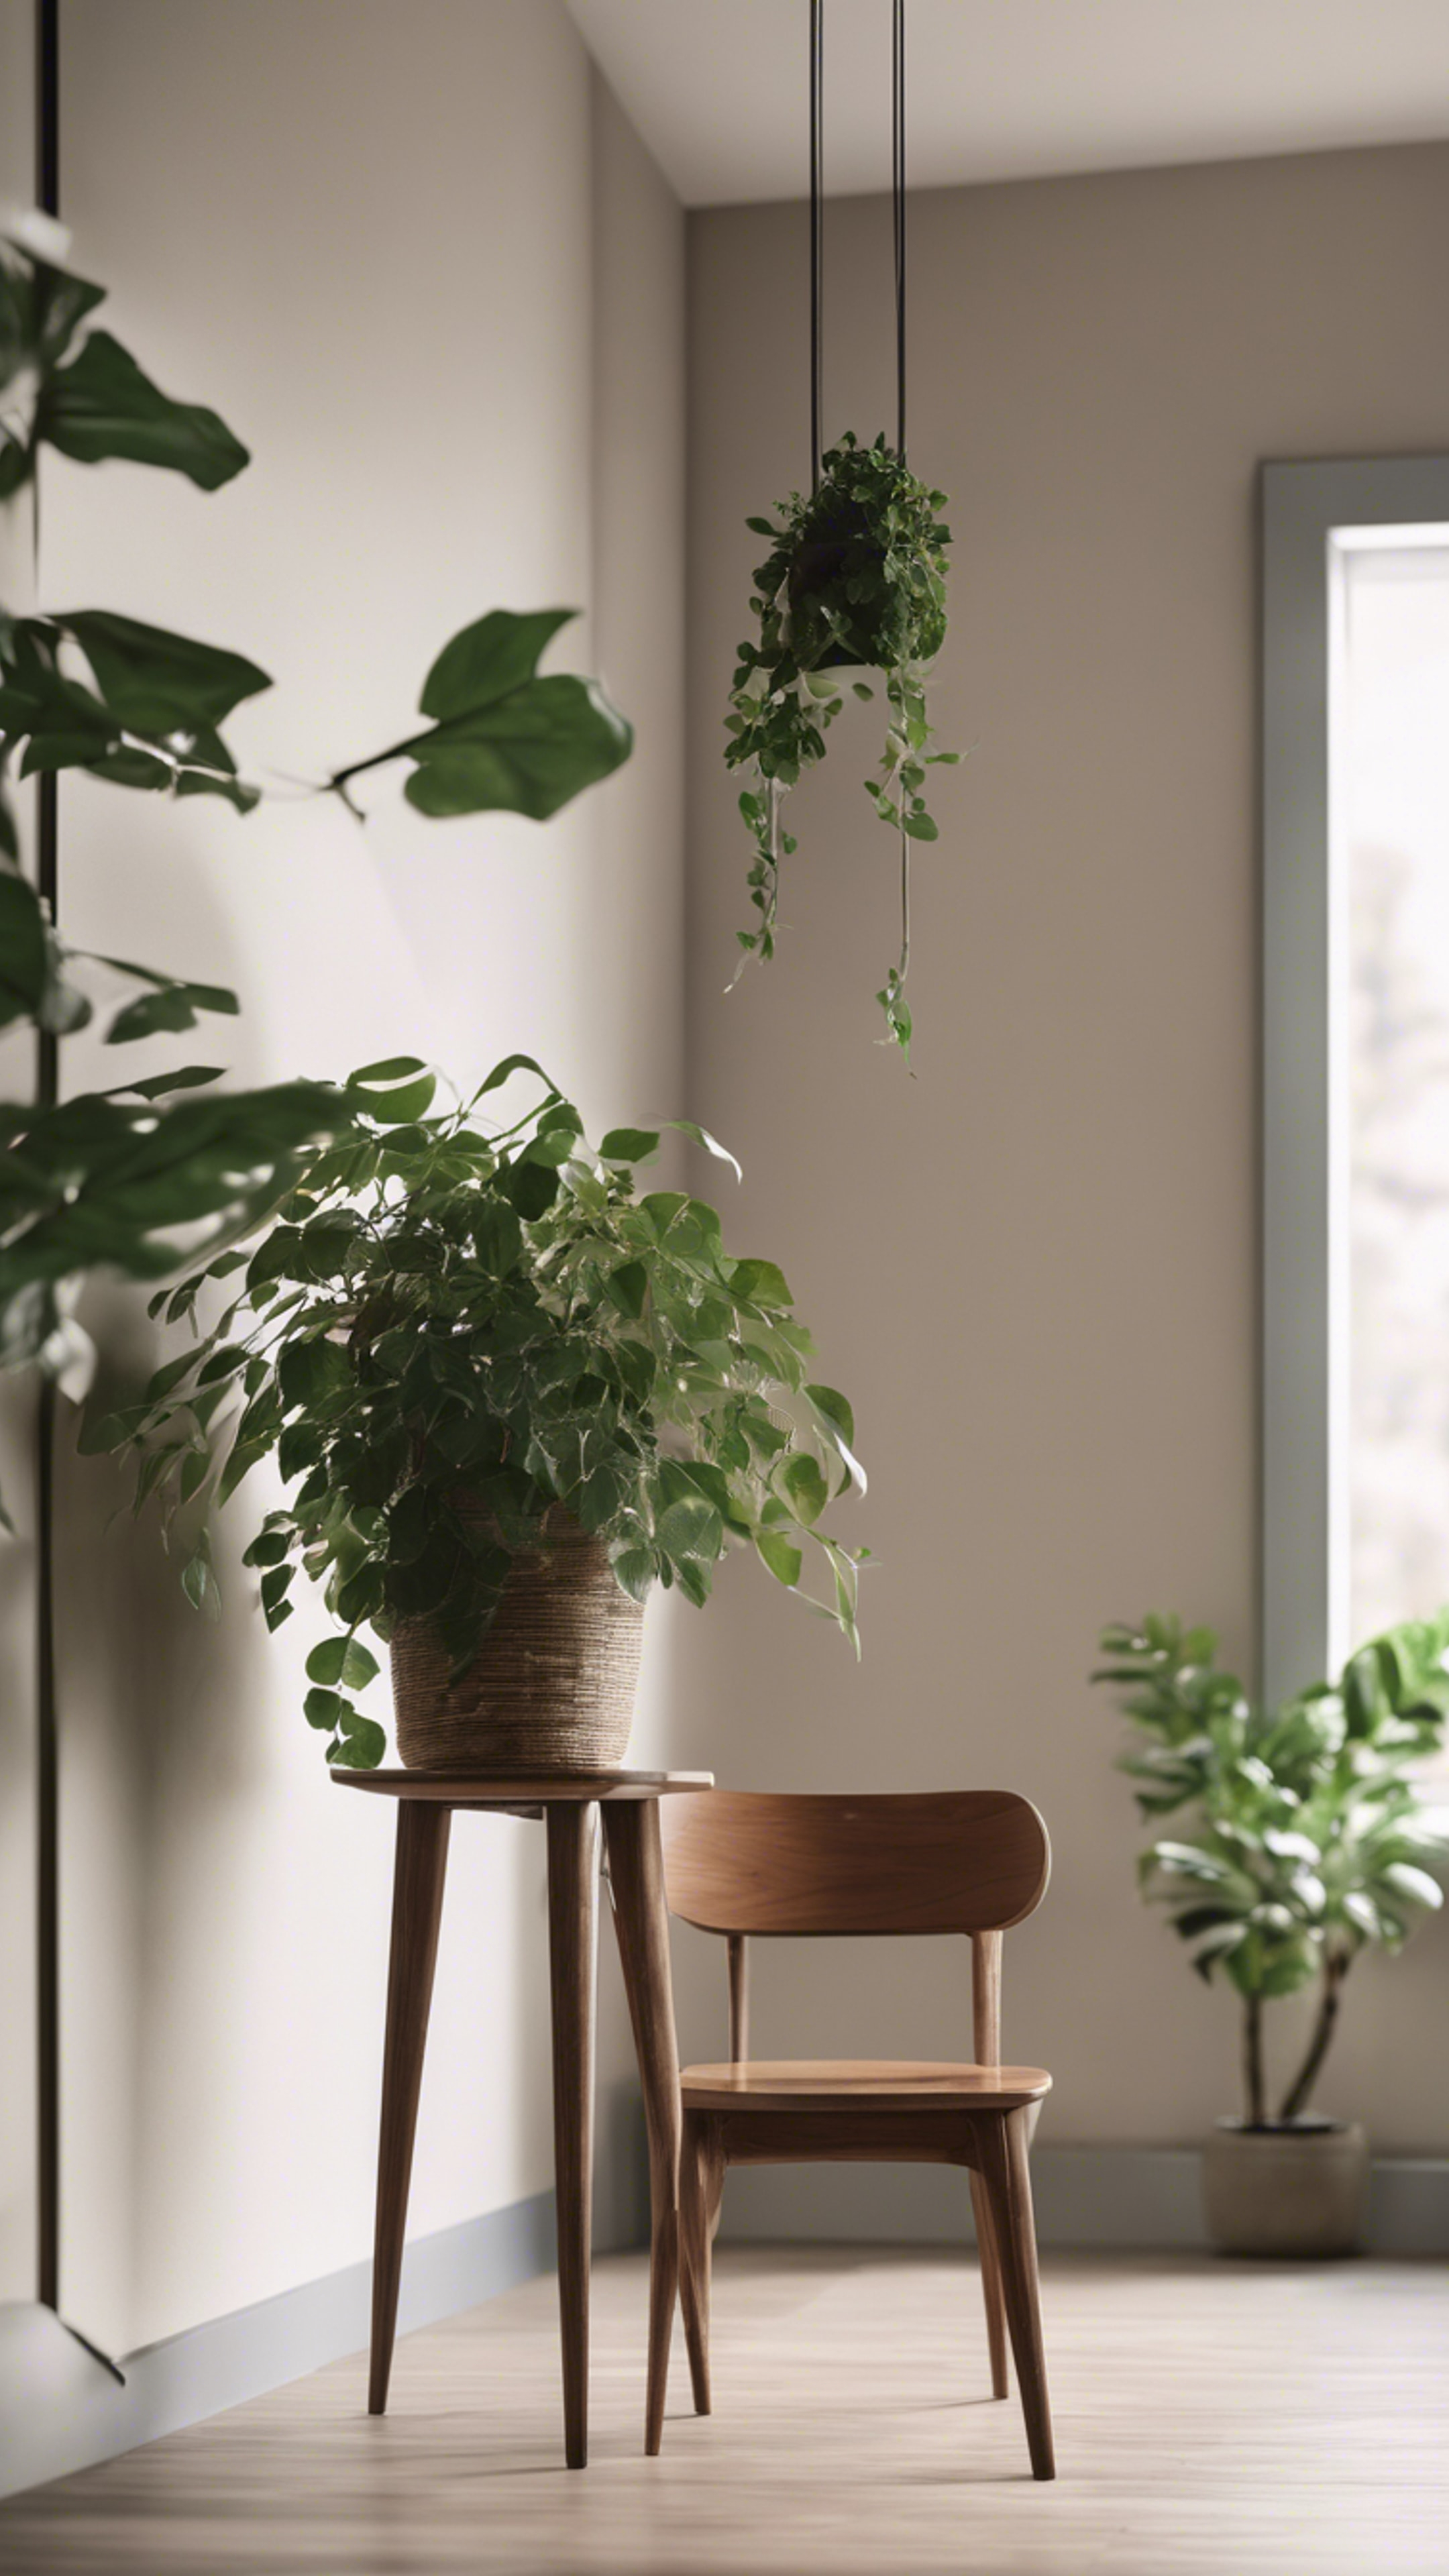 The corner of a minimalist room, featuring a hanging plant and a low, wooden side table. Hình nền[20a0de2ec9c541069b04]